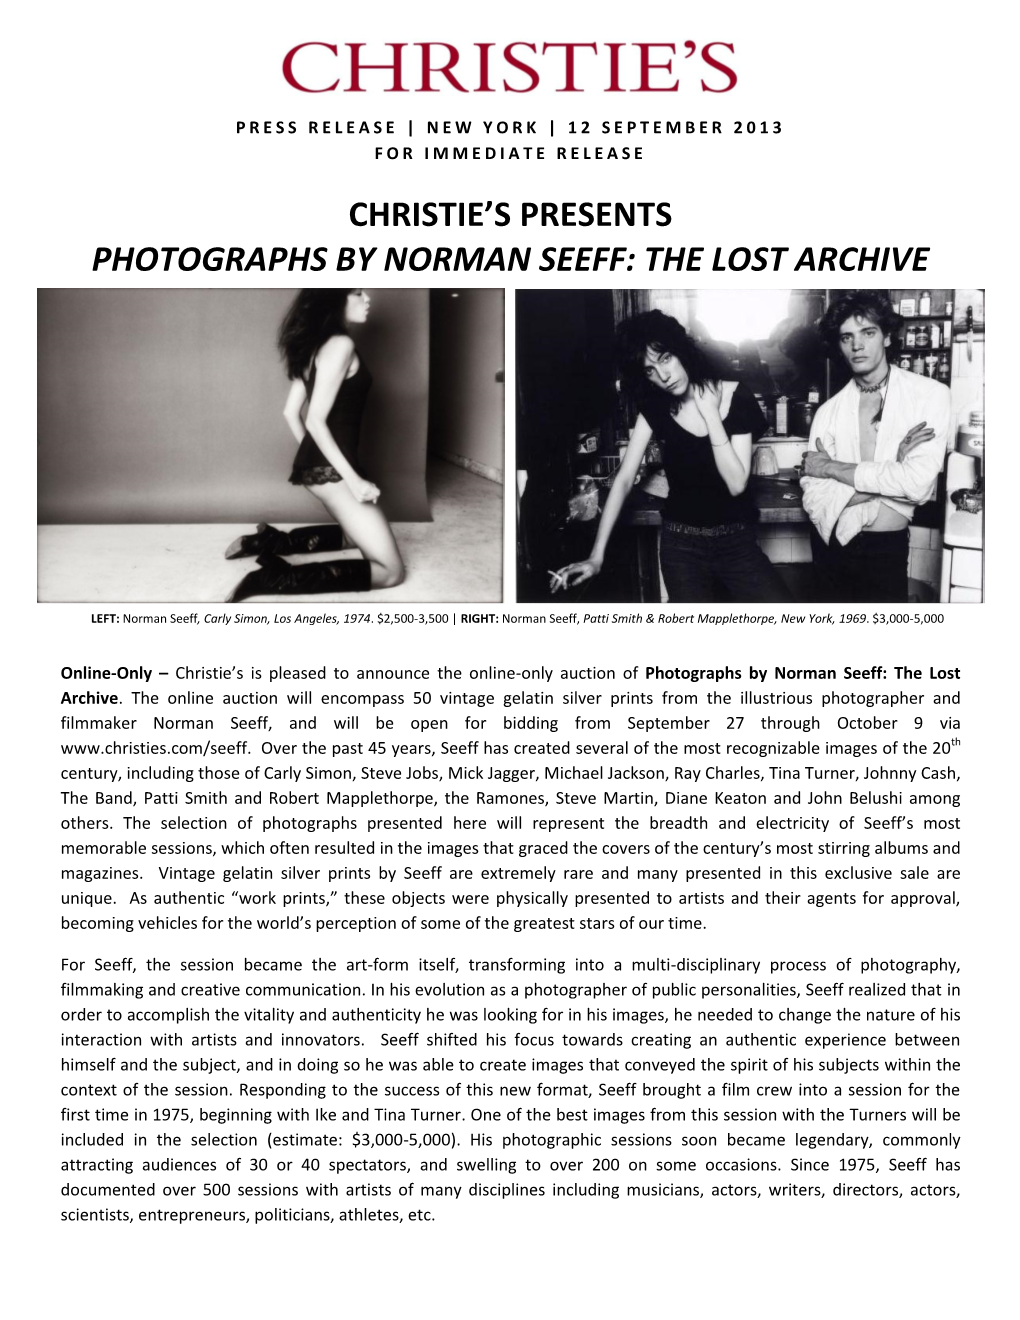 Christie's Presents Photographs by Norman